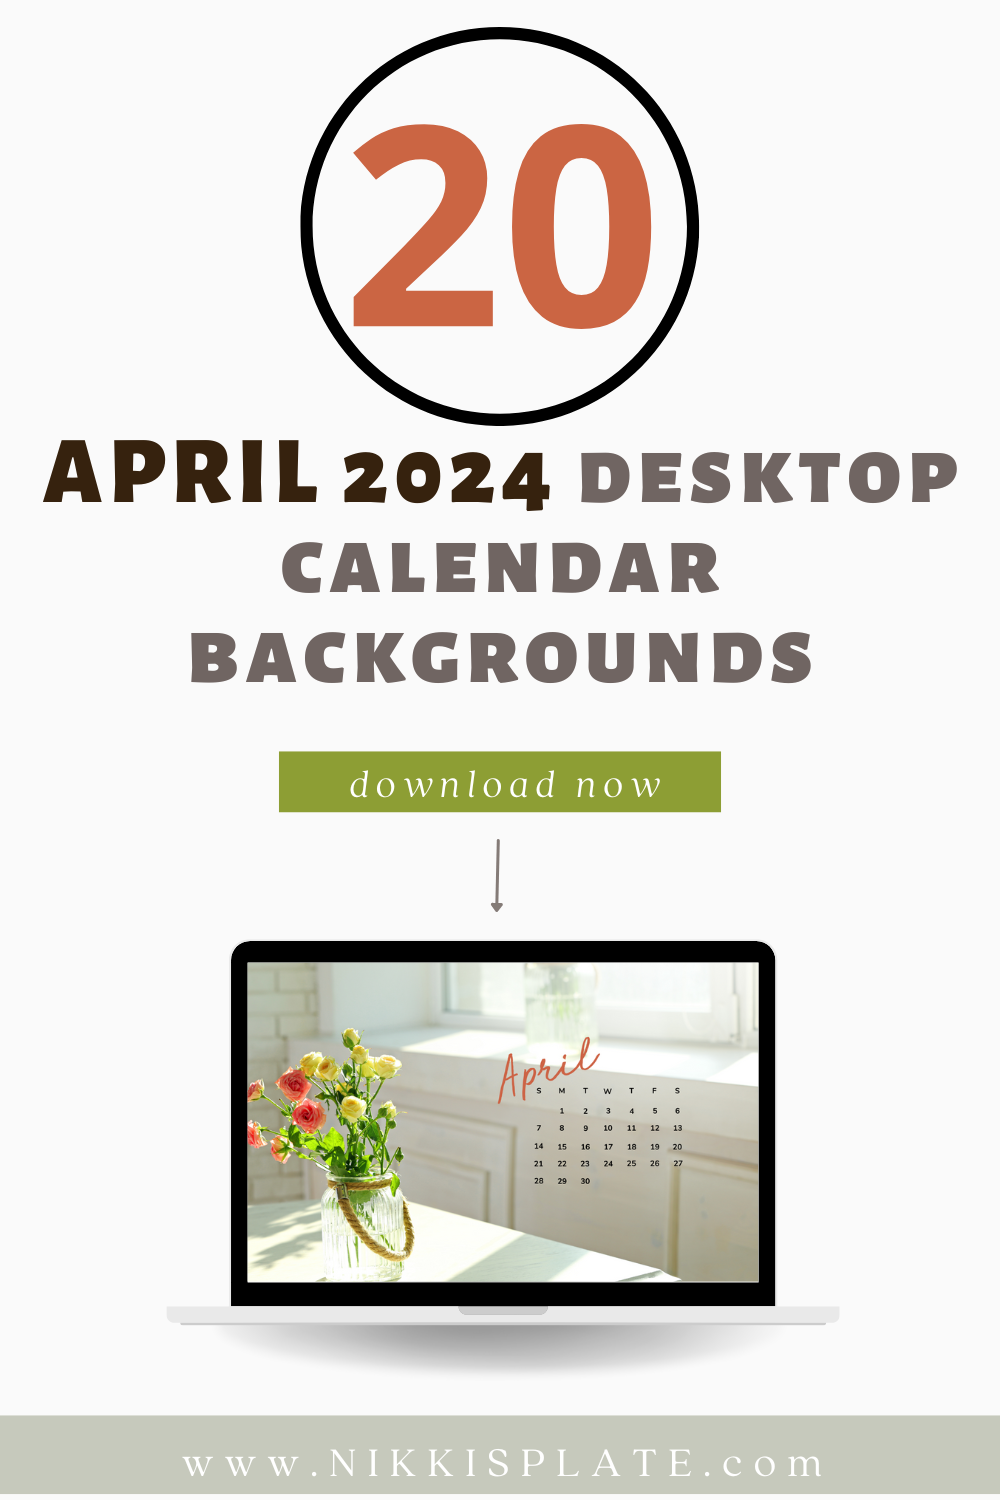 Free April 2024 Desktop Calendar Backgrounds; Here are your free April backgrounds for computers and laptops. Tech freebies for this month!